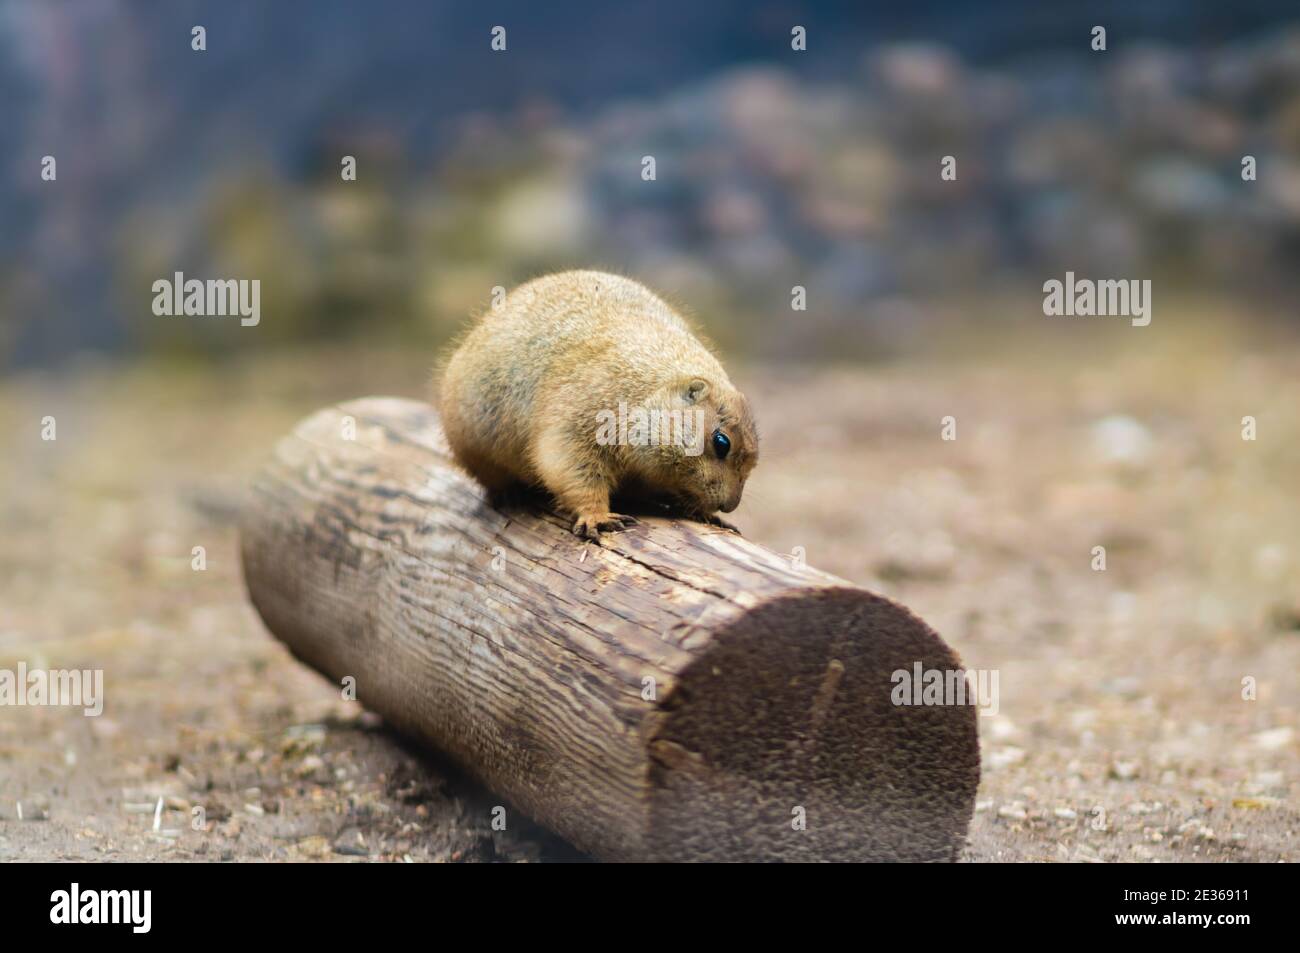 Black-tailed prairie dog stands on a tree trunk, blurred background Stock Photo